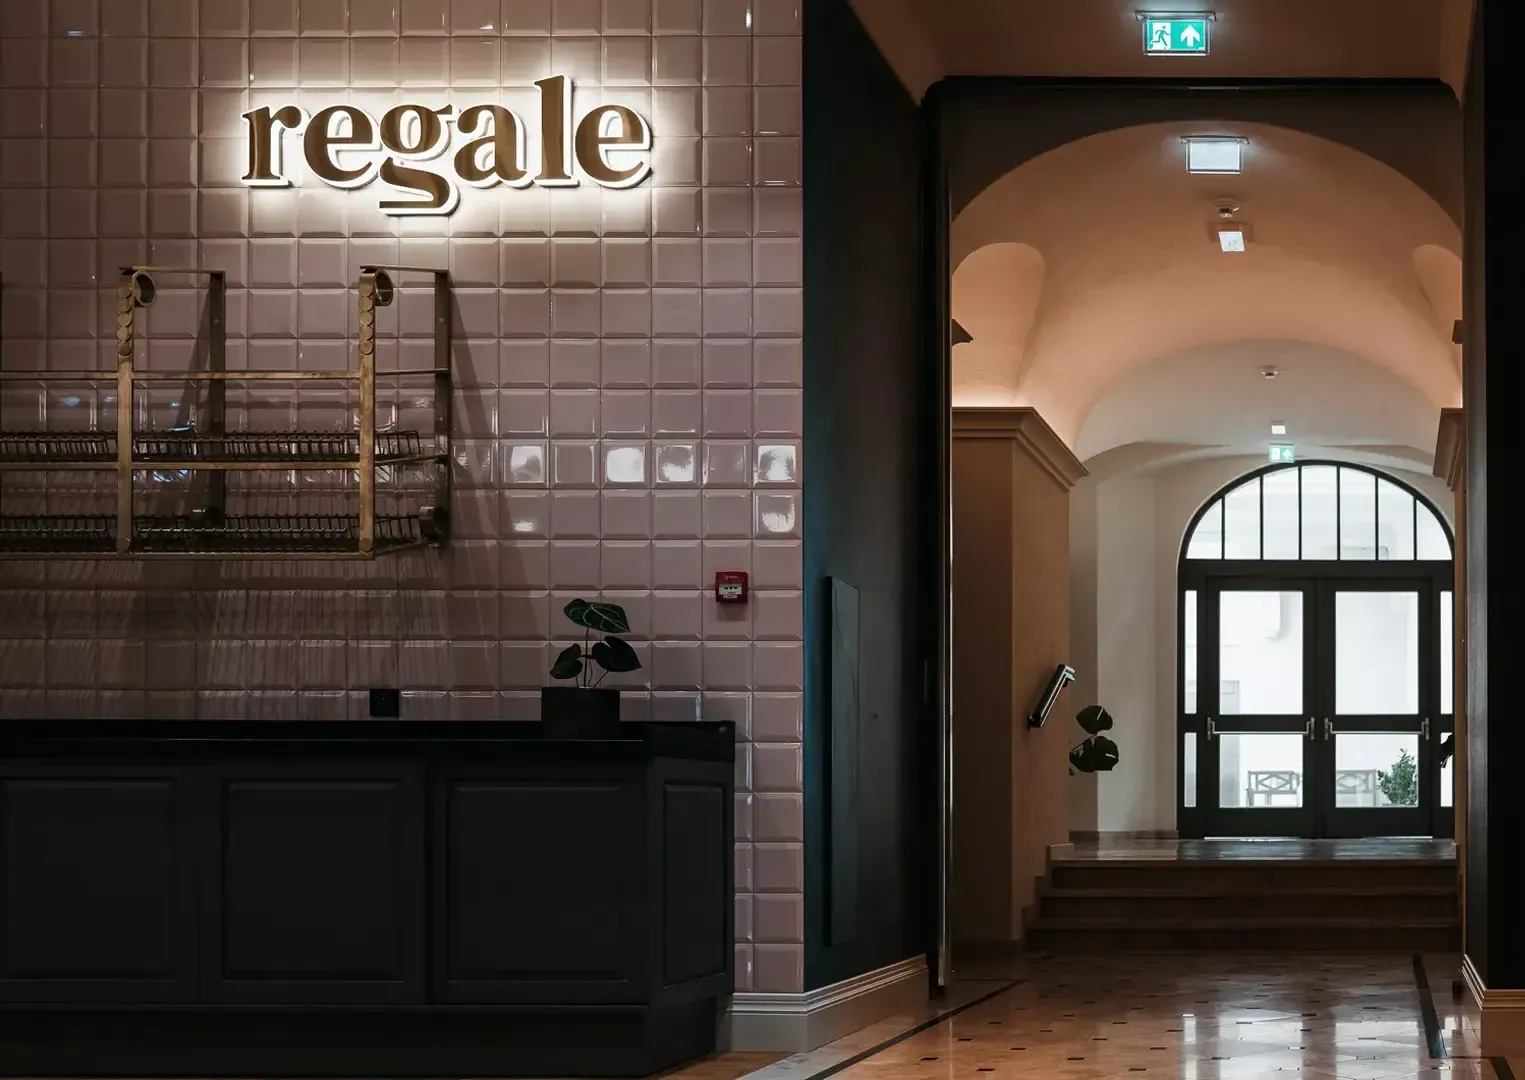 LED Regale Letters - LED letters illuminating the side of Regale